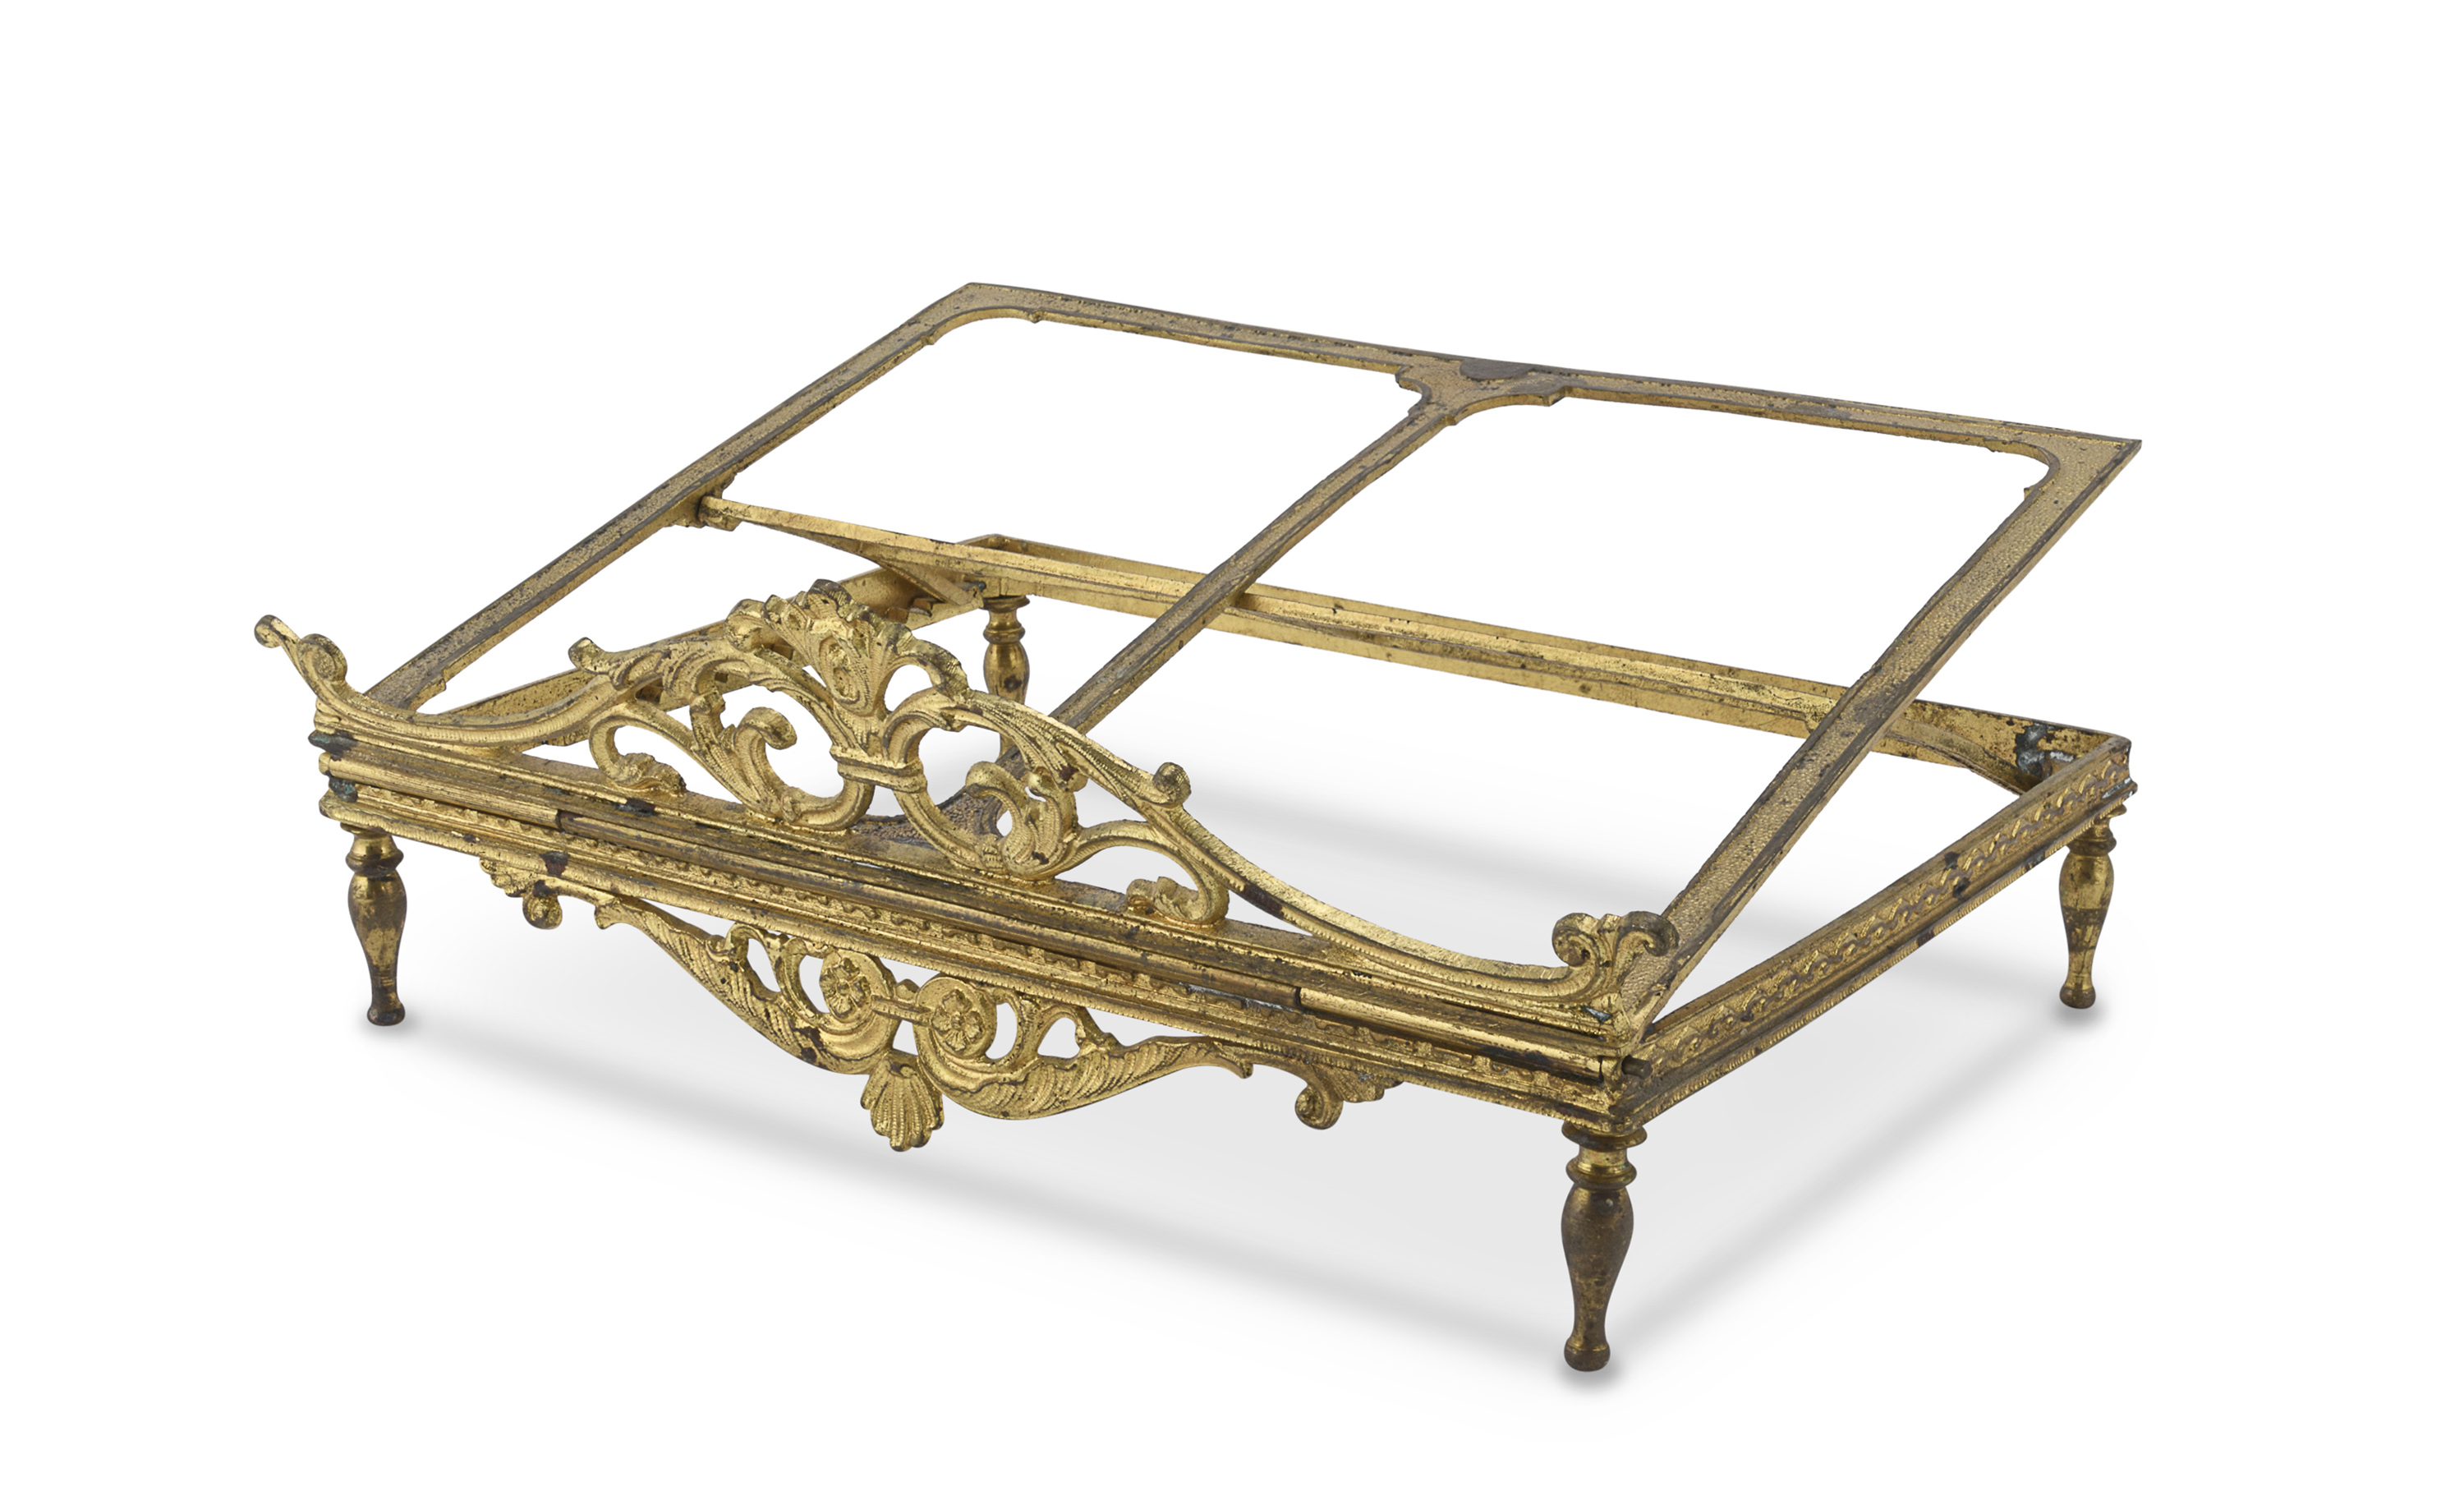 SMALL GILDED BRONZE BOOKREST EARLY 19th CENTURY